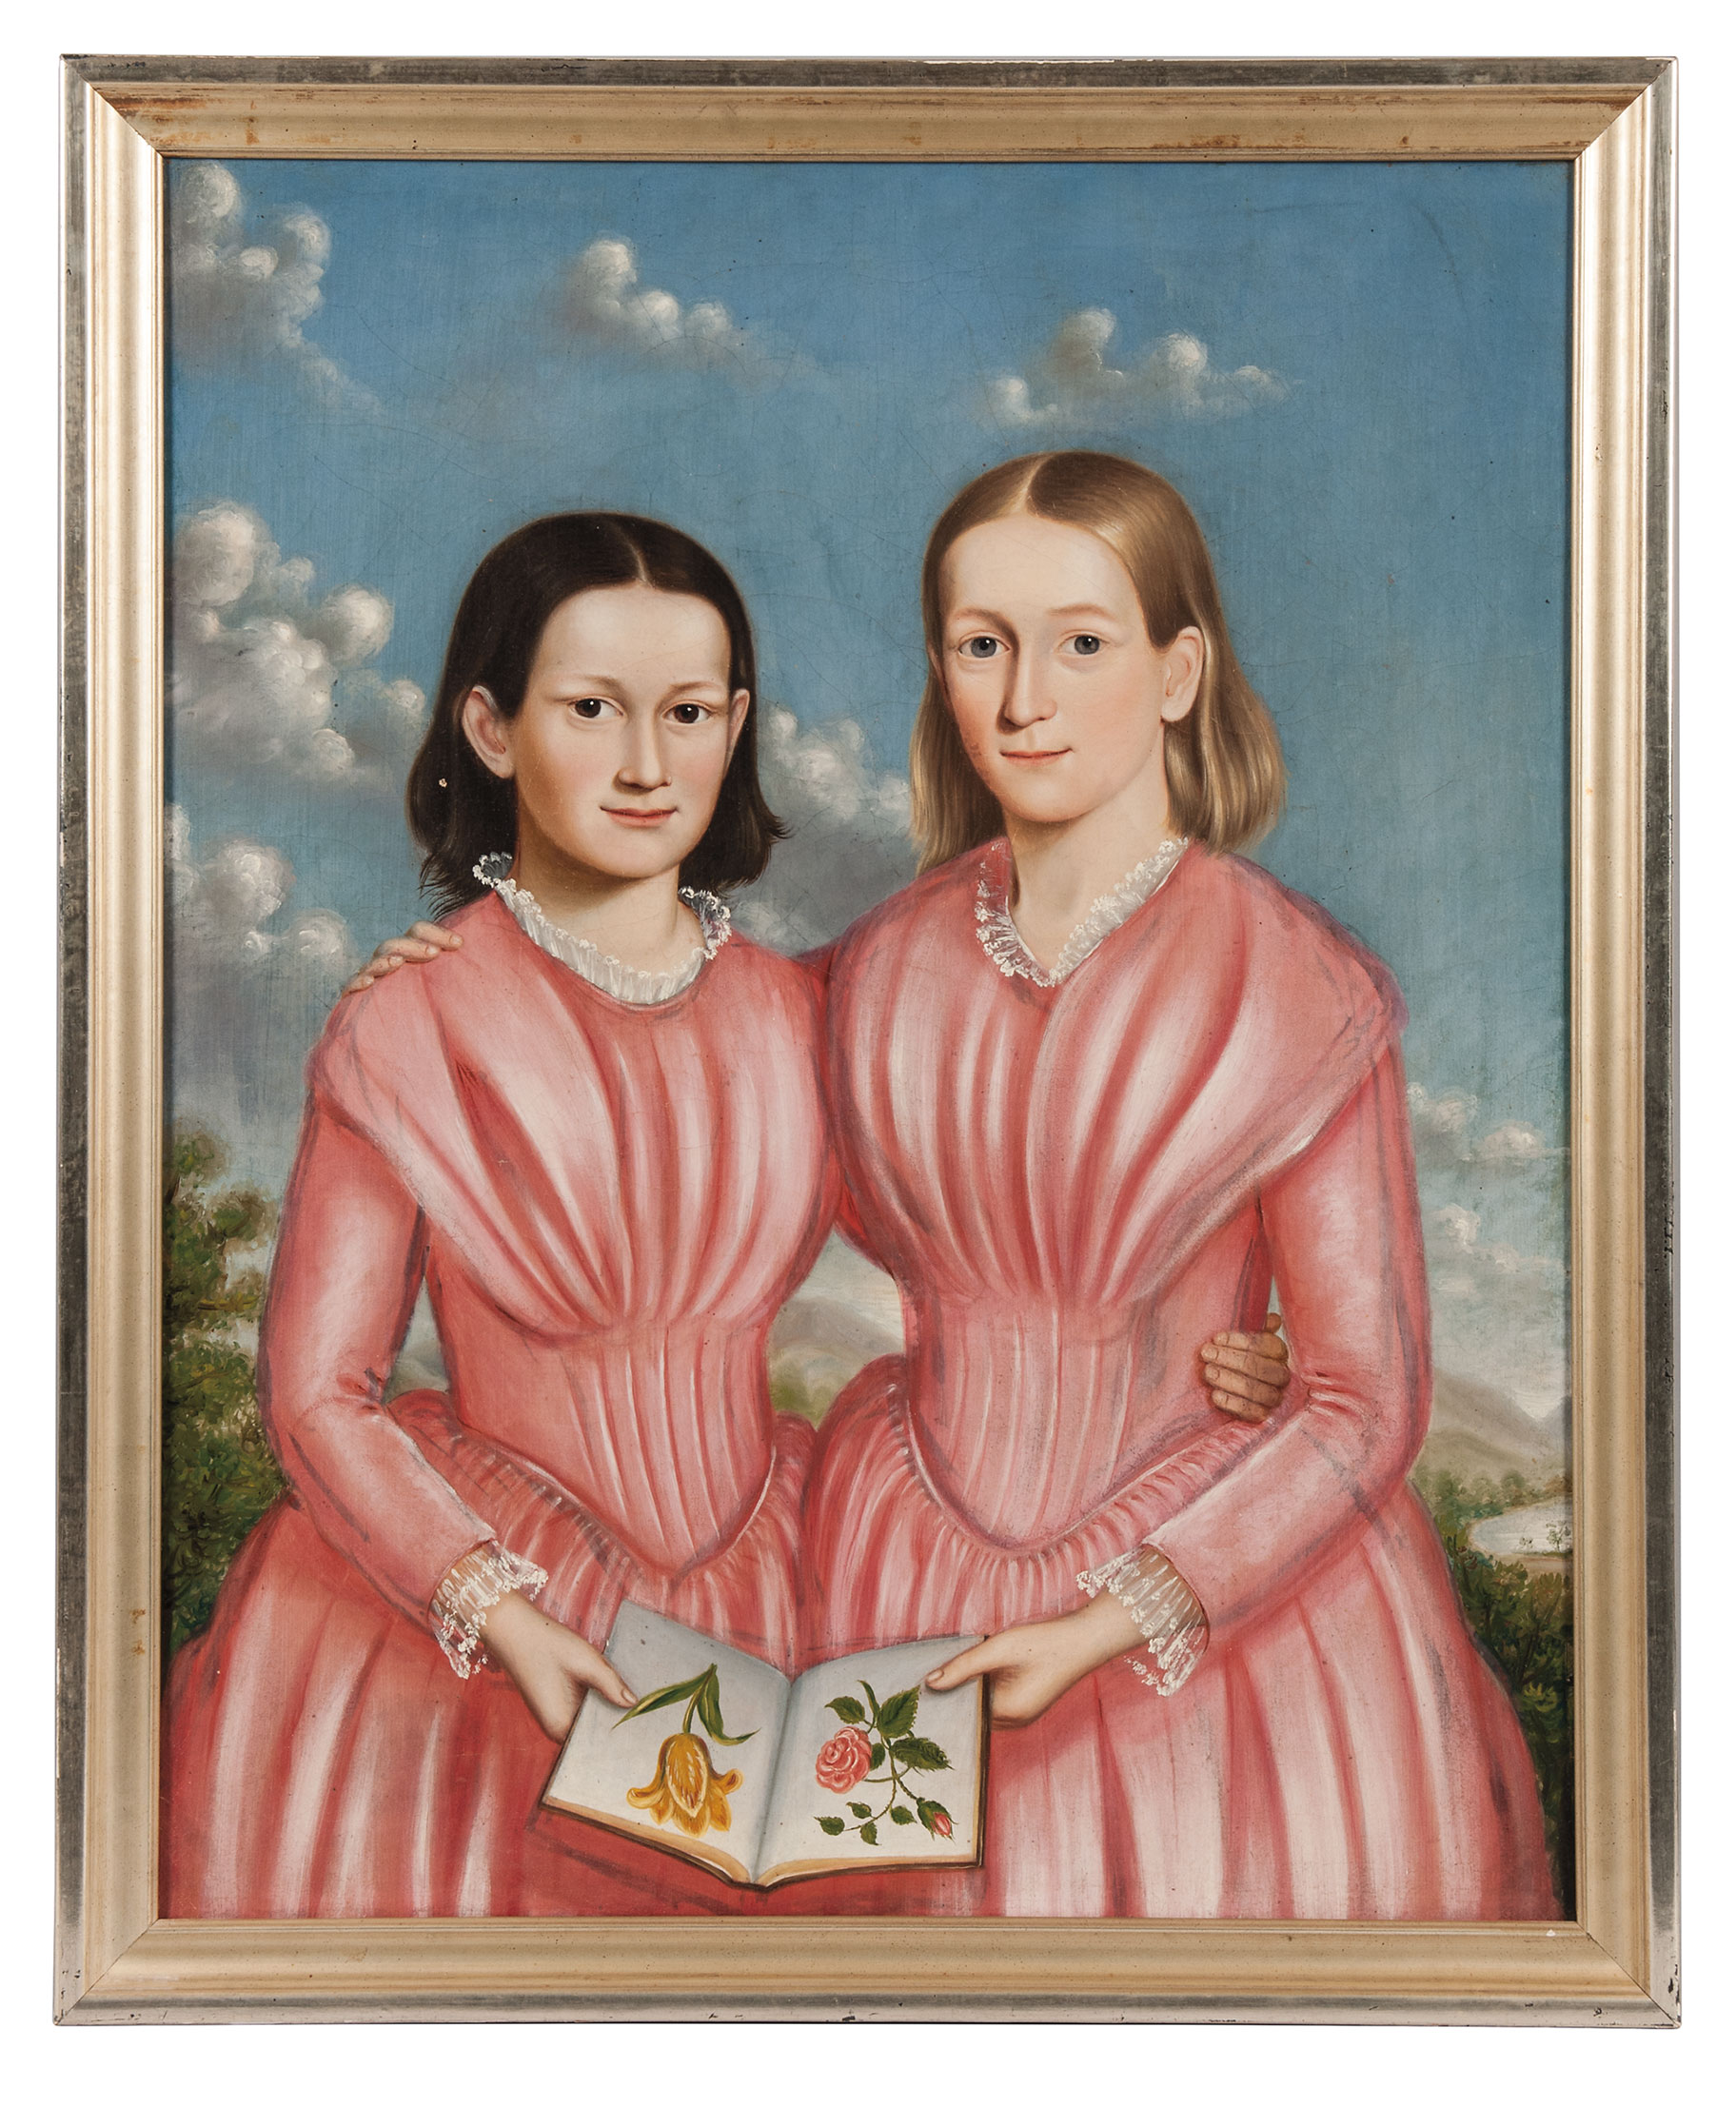 A double portrait of sisters Mary Elizabeth and Caroline Brackett of Newton, Mass., painted between the 1830s and the 1840s.